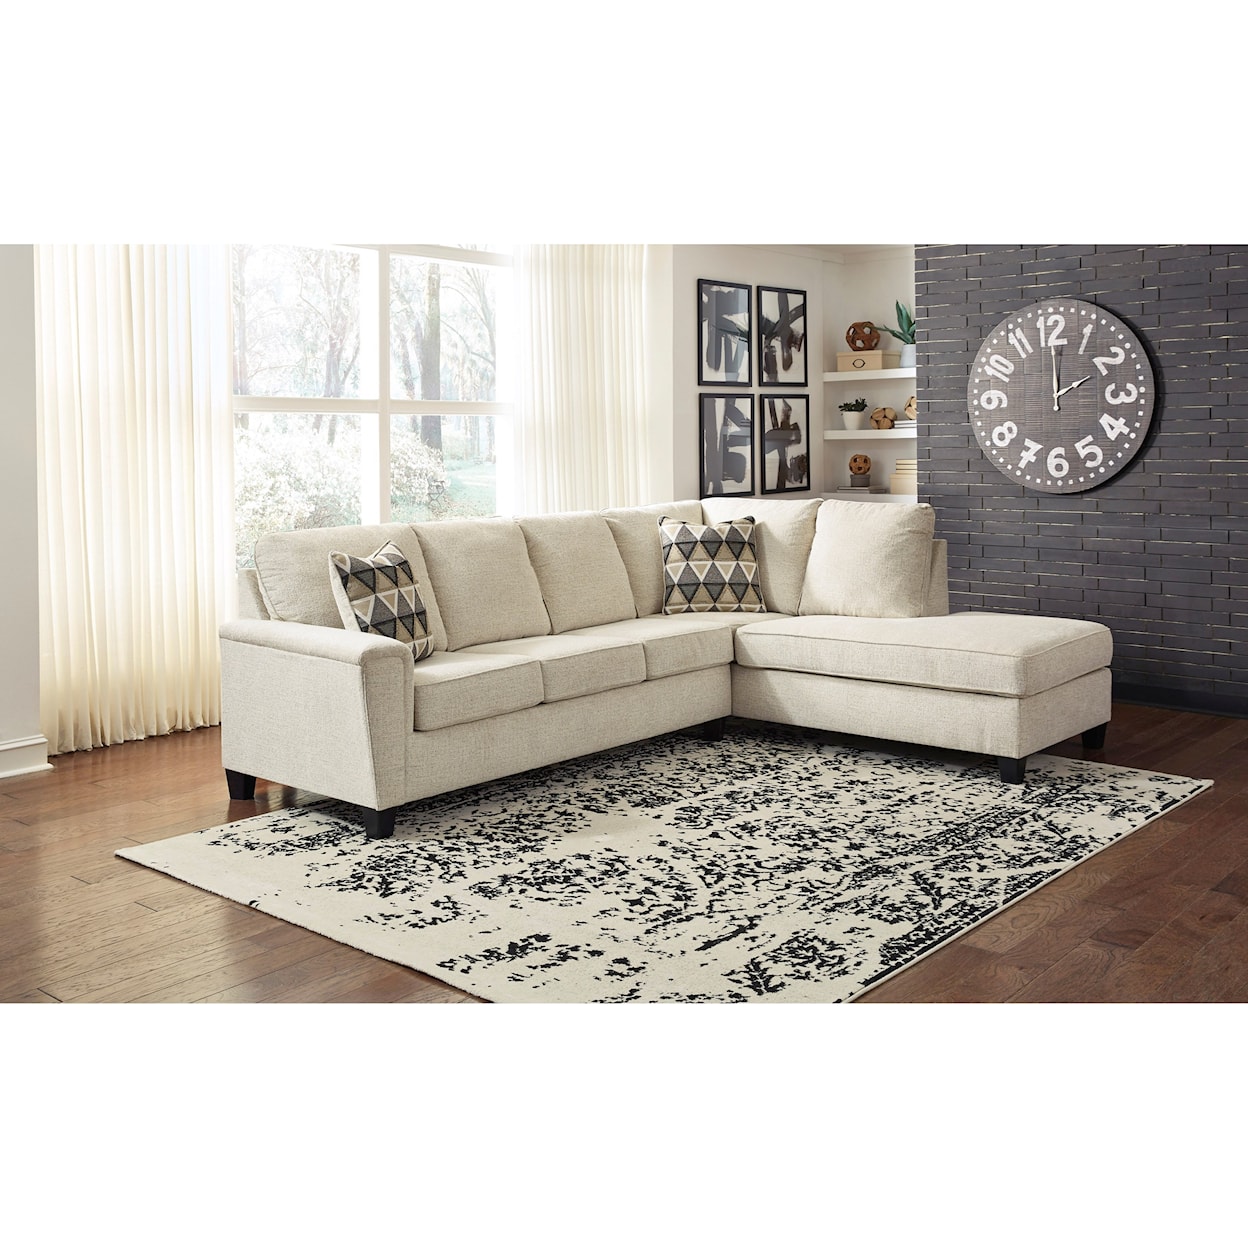 Michael Alan Select Abinger 2-Piece Sectional w/ Chaise and Sleeper